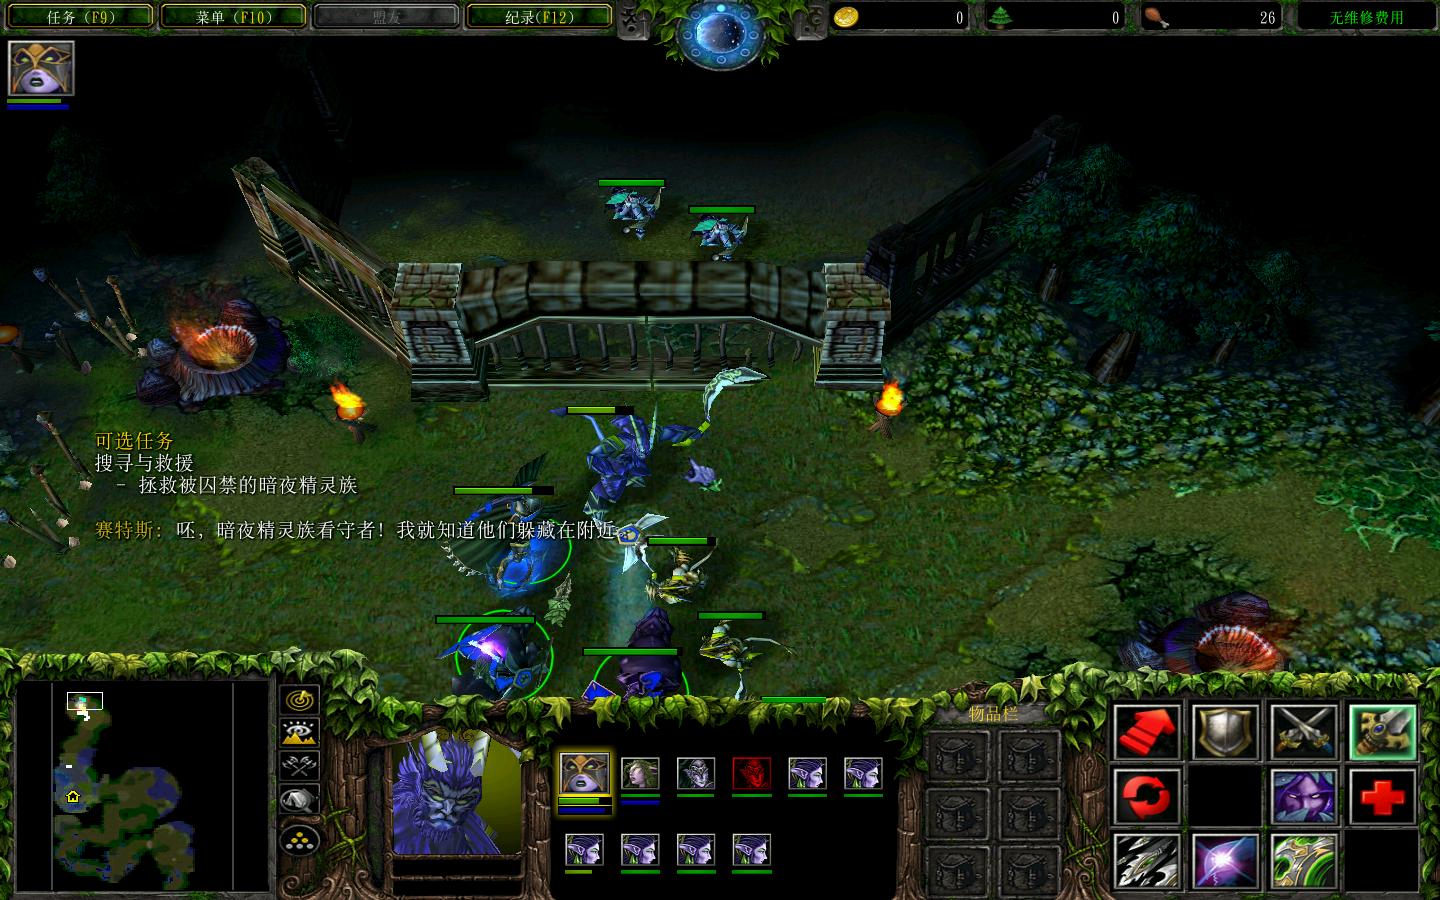 ħ3Warcraft III The Frozen Thronev1.24RPGv4.3.0